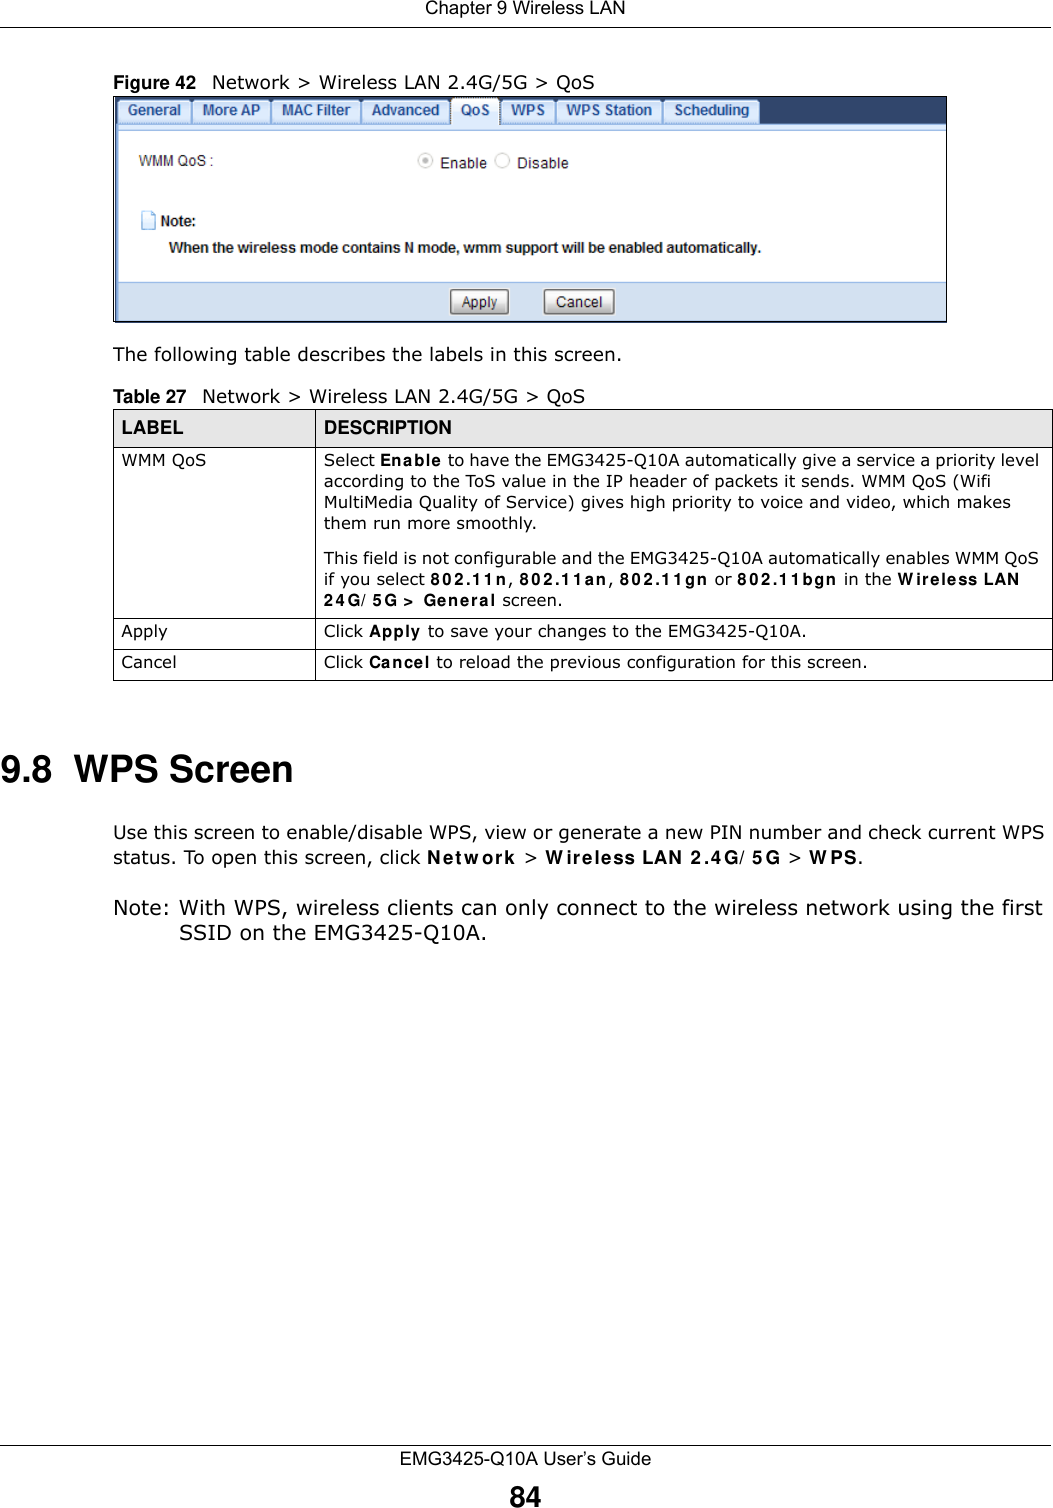 Chapter 9 Wireless LANEMG3425-Q10A User’s Guide84Figure 42   Network &gt; Wireless LAN 2.4G/5G &gt; QoS The following table describes the labels in this screen. 9.8  WPS ScreenUse this screen to enable/disable WPS, view or generate a new PIN number and check current WPS status. To open this screen, click N et w ork &gt; W ir e less LAN 2 .4 G/ 5 G &gt; W PS.Note: With WPS, wireless clients can only connect to the wireless network using the first SSID on the EMG3425-Q10A.Table 27   Network &gt; Wireless LAN 2.4G/5G &gt; QoSLABEL DESCRIPTIONWMM QoS Select Enable to have the EMG3425-Q10A automatically give a service a priority level according to the ToS value in the IP header of packets it sends. WMM QoS (Wifi MultiMedia Quality of Service) gives high priority to voice and video, which makes them run more smoothly.This field is not configurable and the EMG3425-Q10A automatically enables WMM QoS if you select 8 0 2 .1 1 n, 8 0 2 .1 1 a n, 8 0 2 .1 1 gn or 8 0 2 .1 1 bgn in the W ir eless LAN  2 4 G/ 5 G &gt;  Ge neral screen.Apply Click Apply to save your changes to the EMG3425-Q10A.Cancel Click Cancel to reload the previous configuration for this screen.